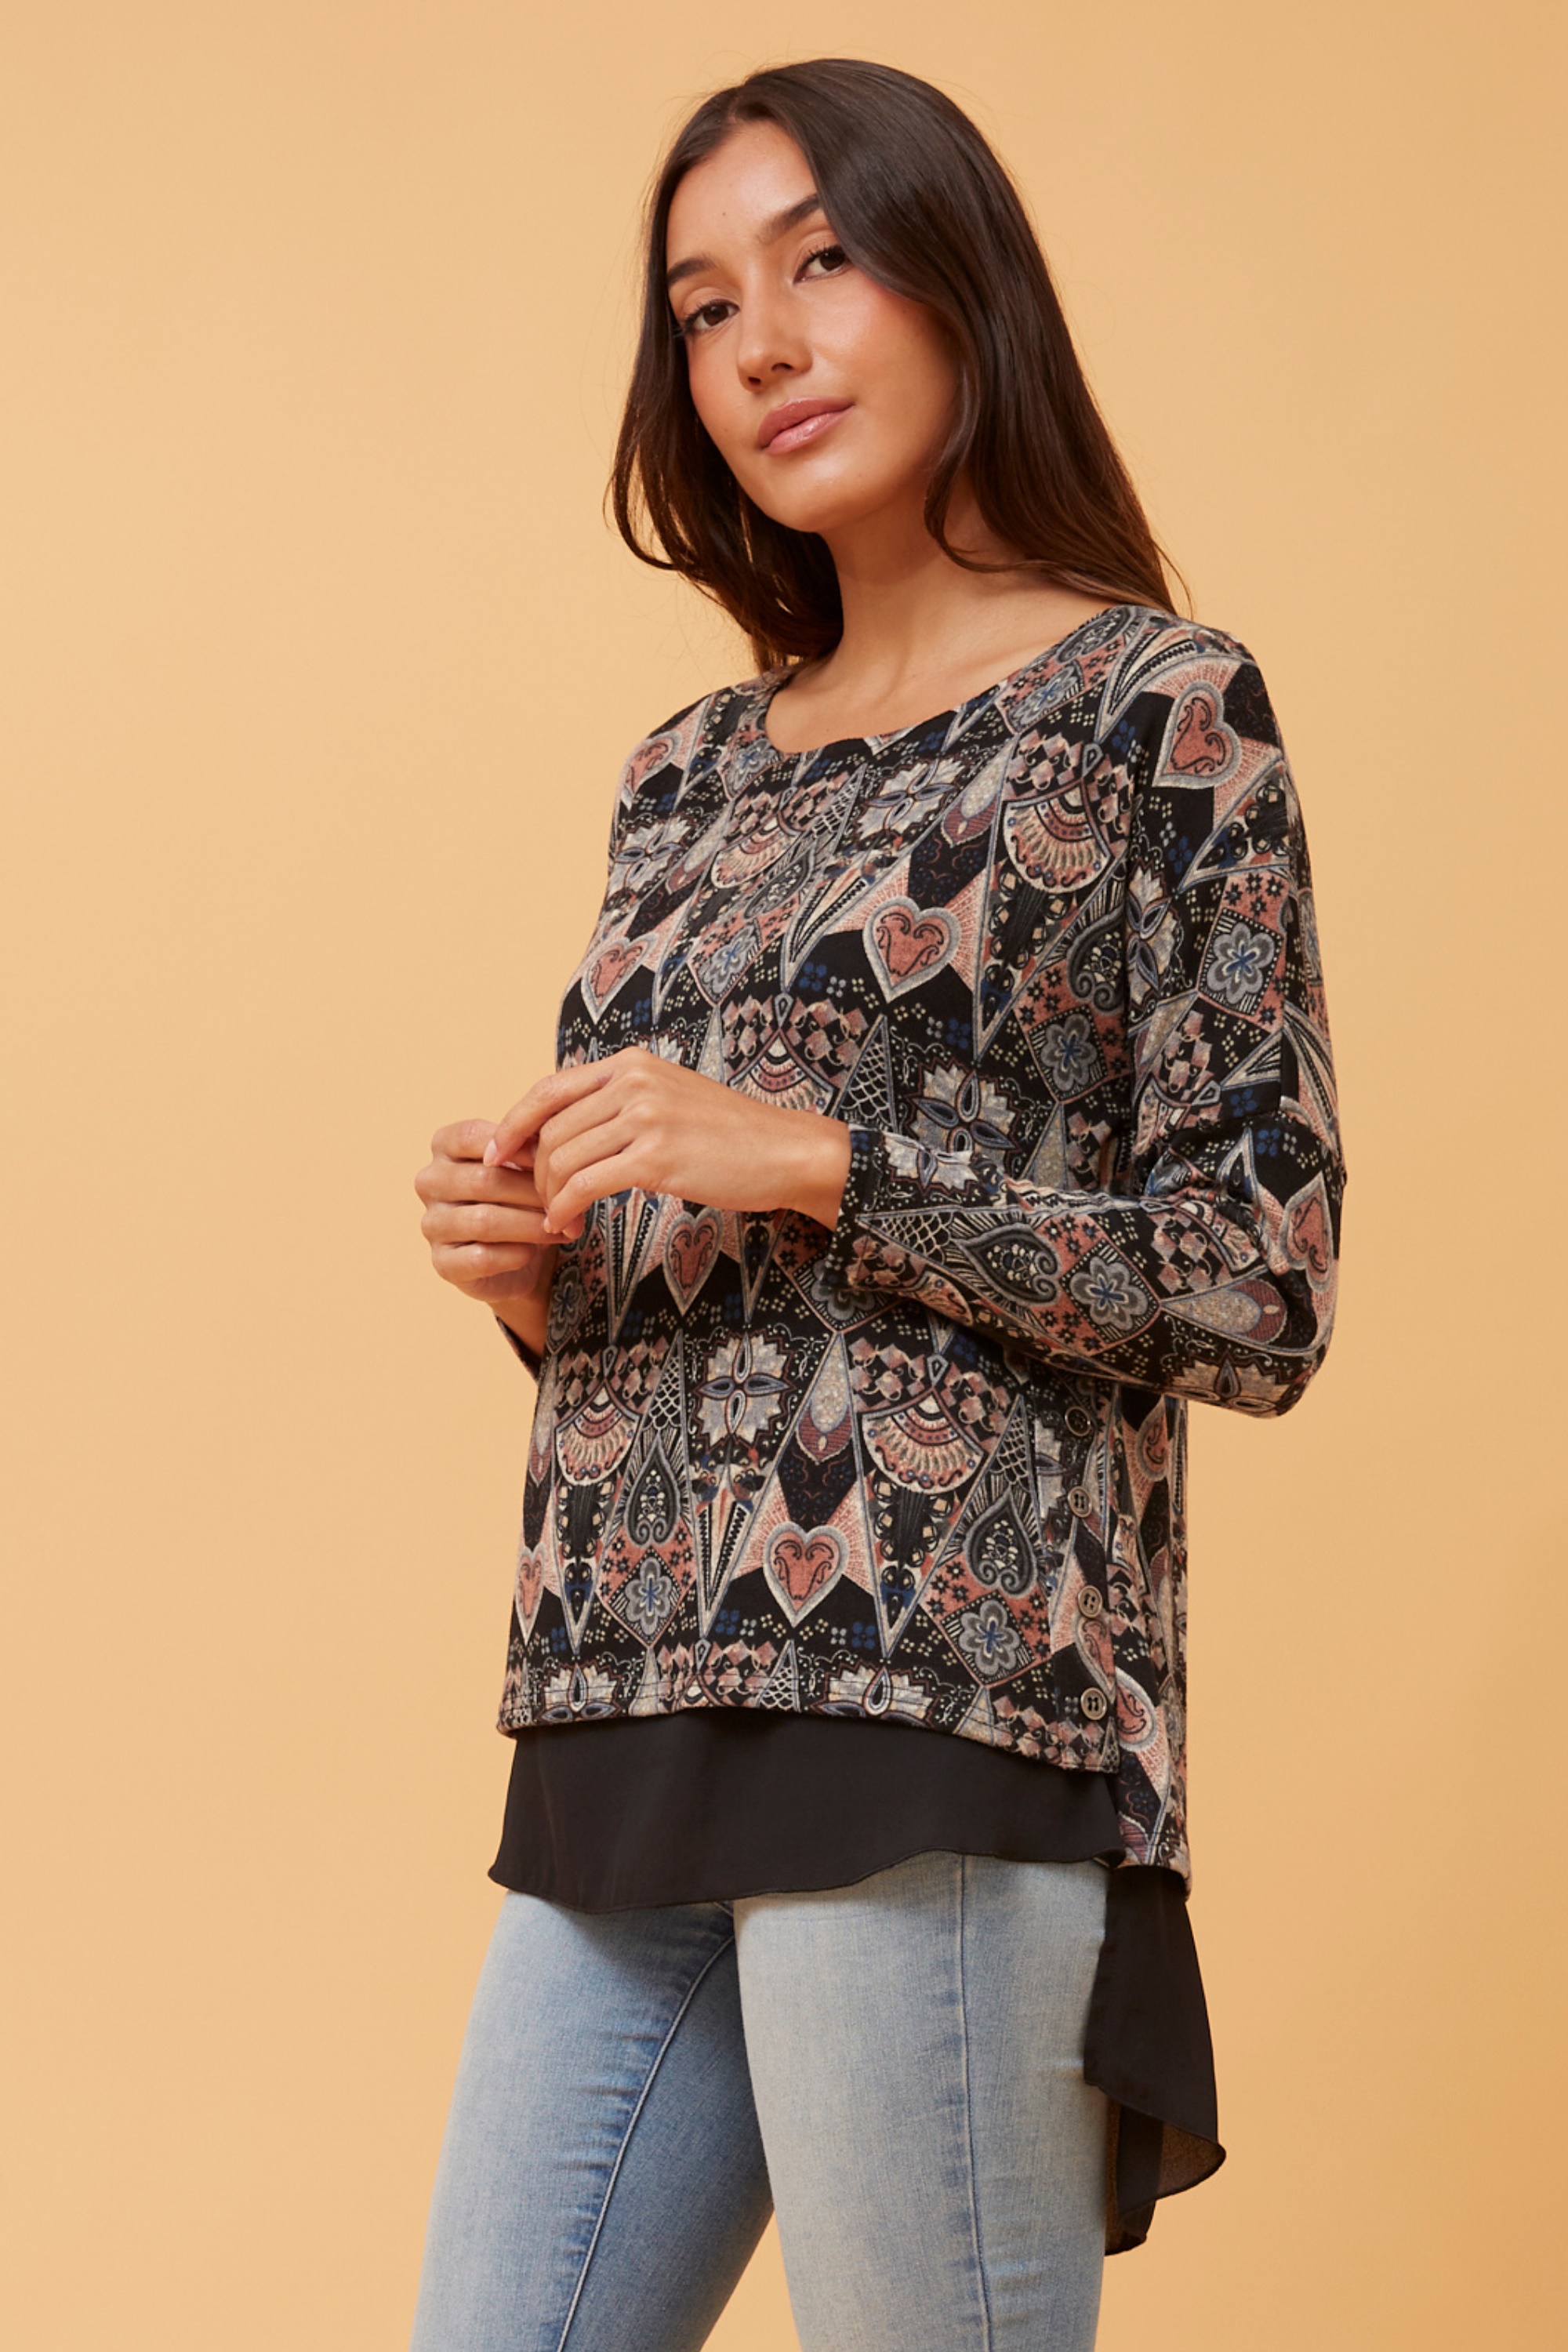 PENNY DOUBLE LAYER TOP